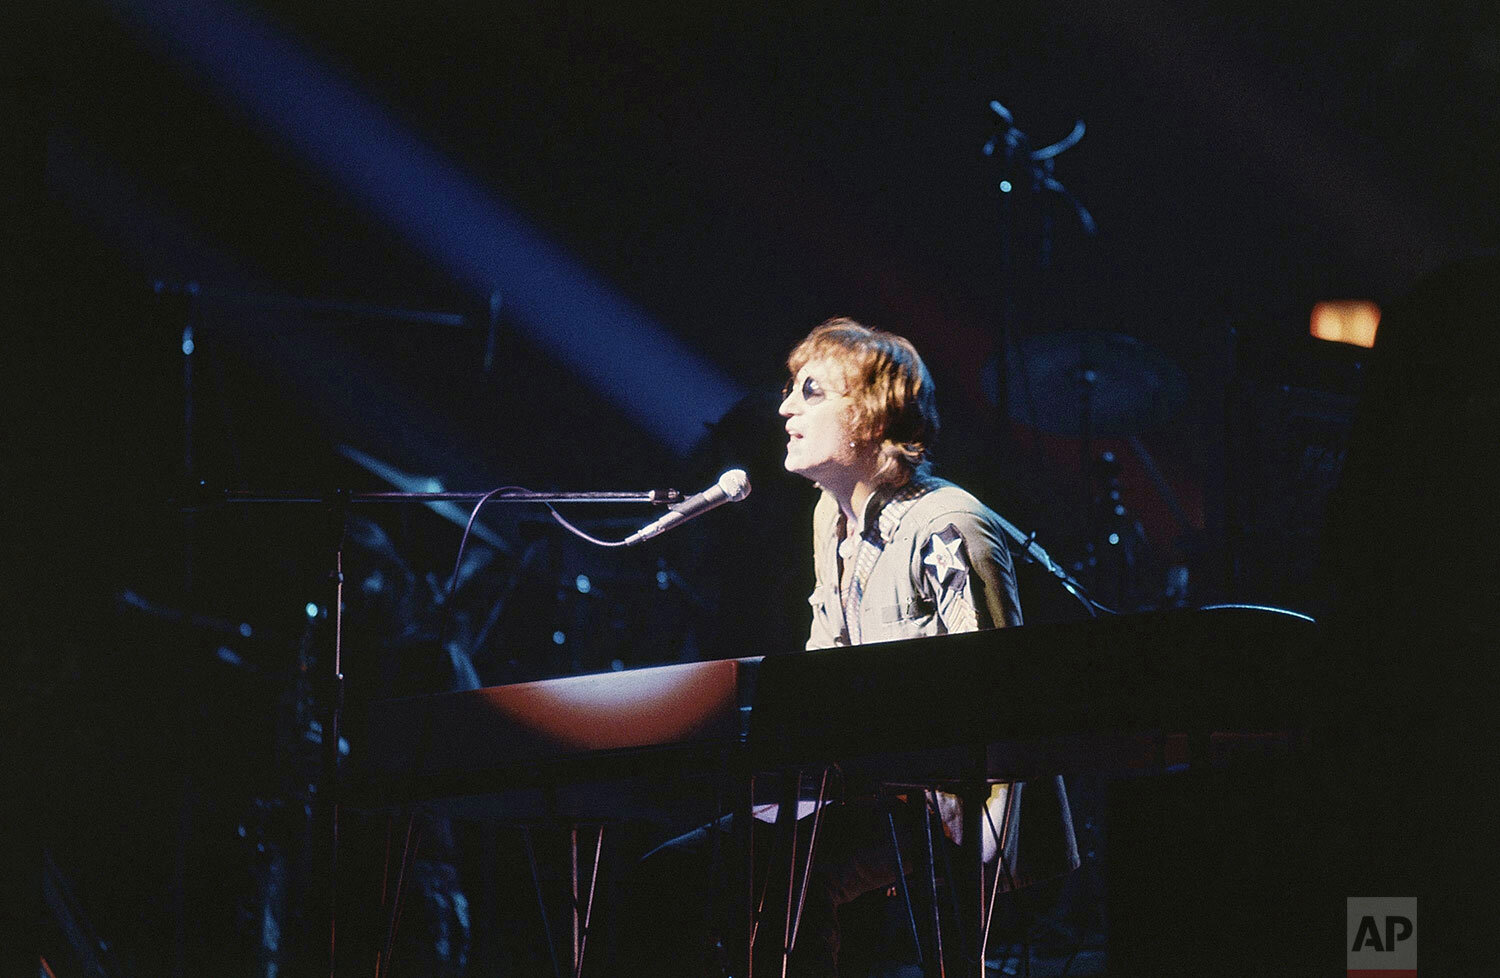  Former Beatle John Lennon performs during a charity concert to benefit mentally challenged children at Madison Square Garden, Aug. 30, 1972, New York. (AP Photo/Dave Pickoff) 